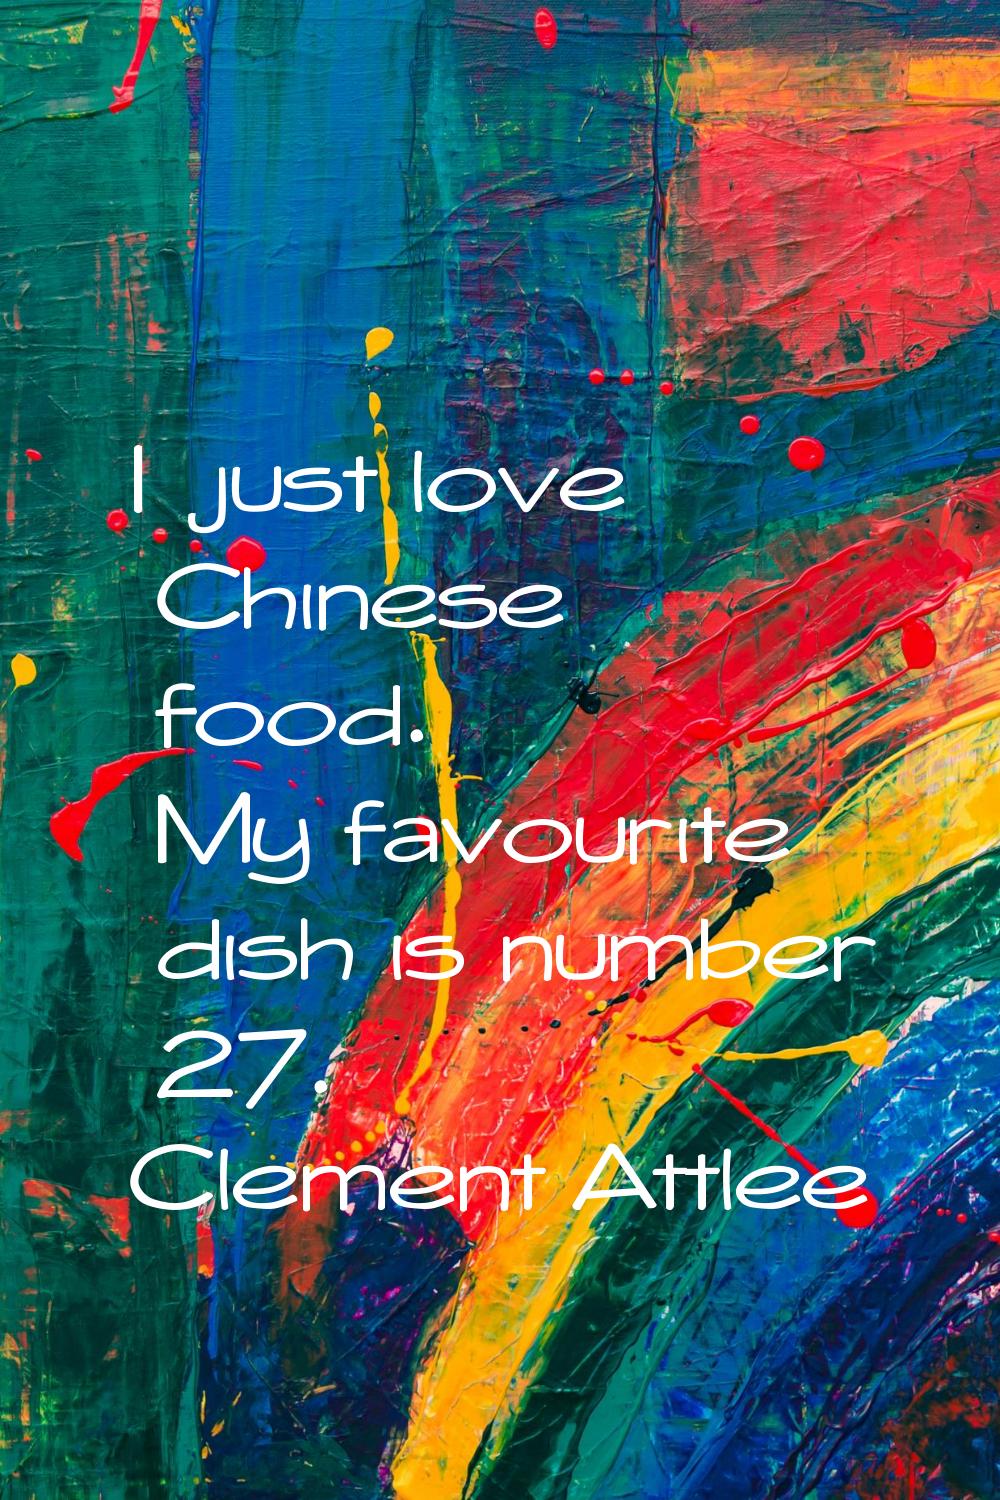 I just love Chinese food. My favourite dish is number 27.